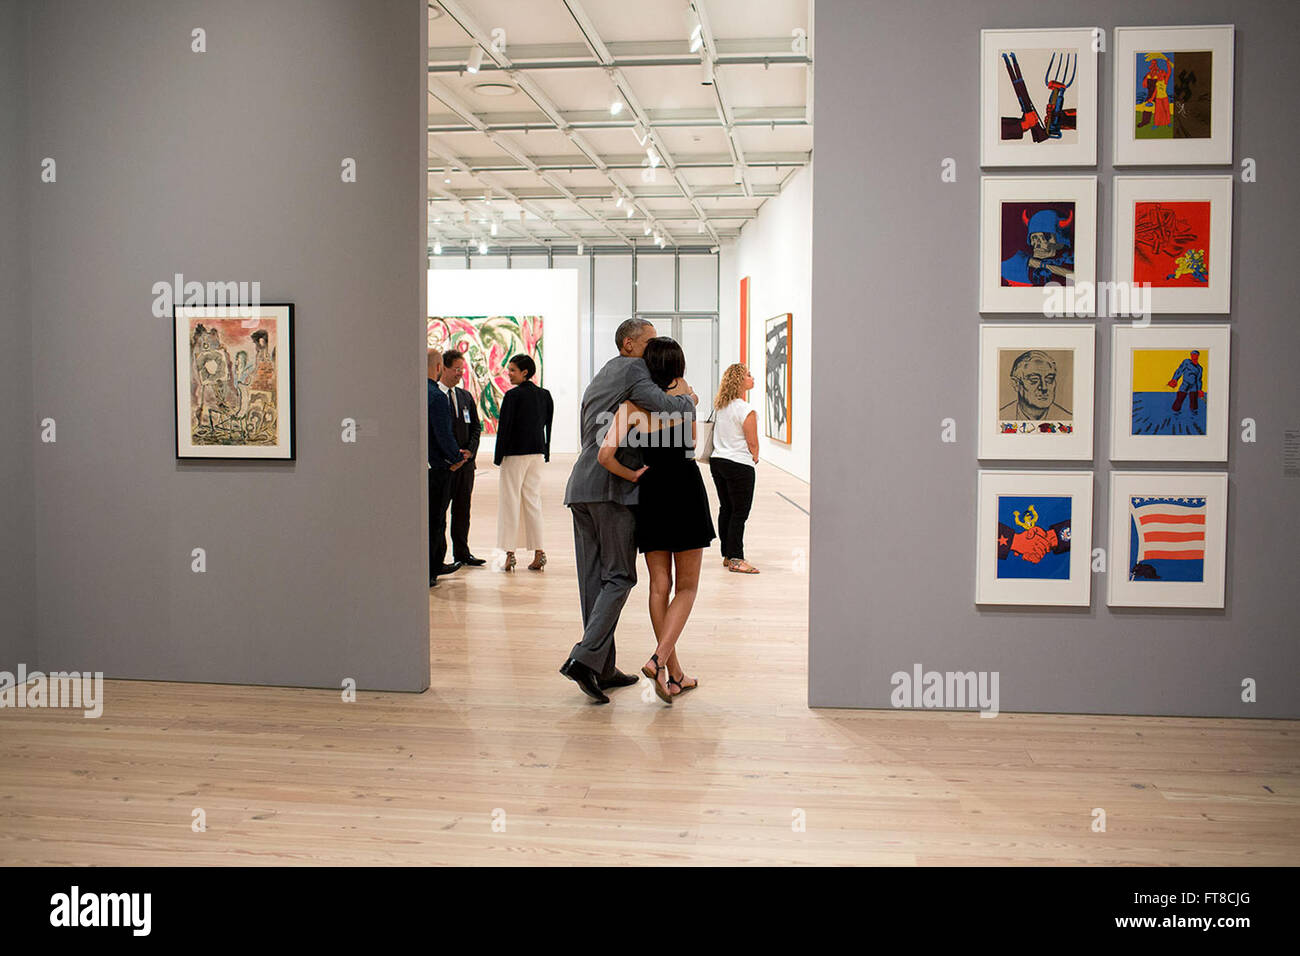 July 17, 2015 'While visiting the Whitney Museum in New York City, the President hugged his daughter Malia as they looked at the art work.' (Official White House Photo by Pete Souza) Stock Photo